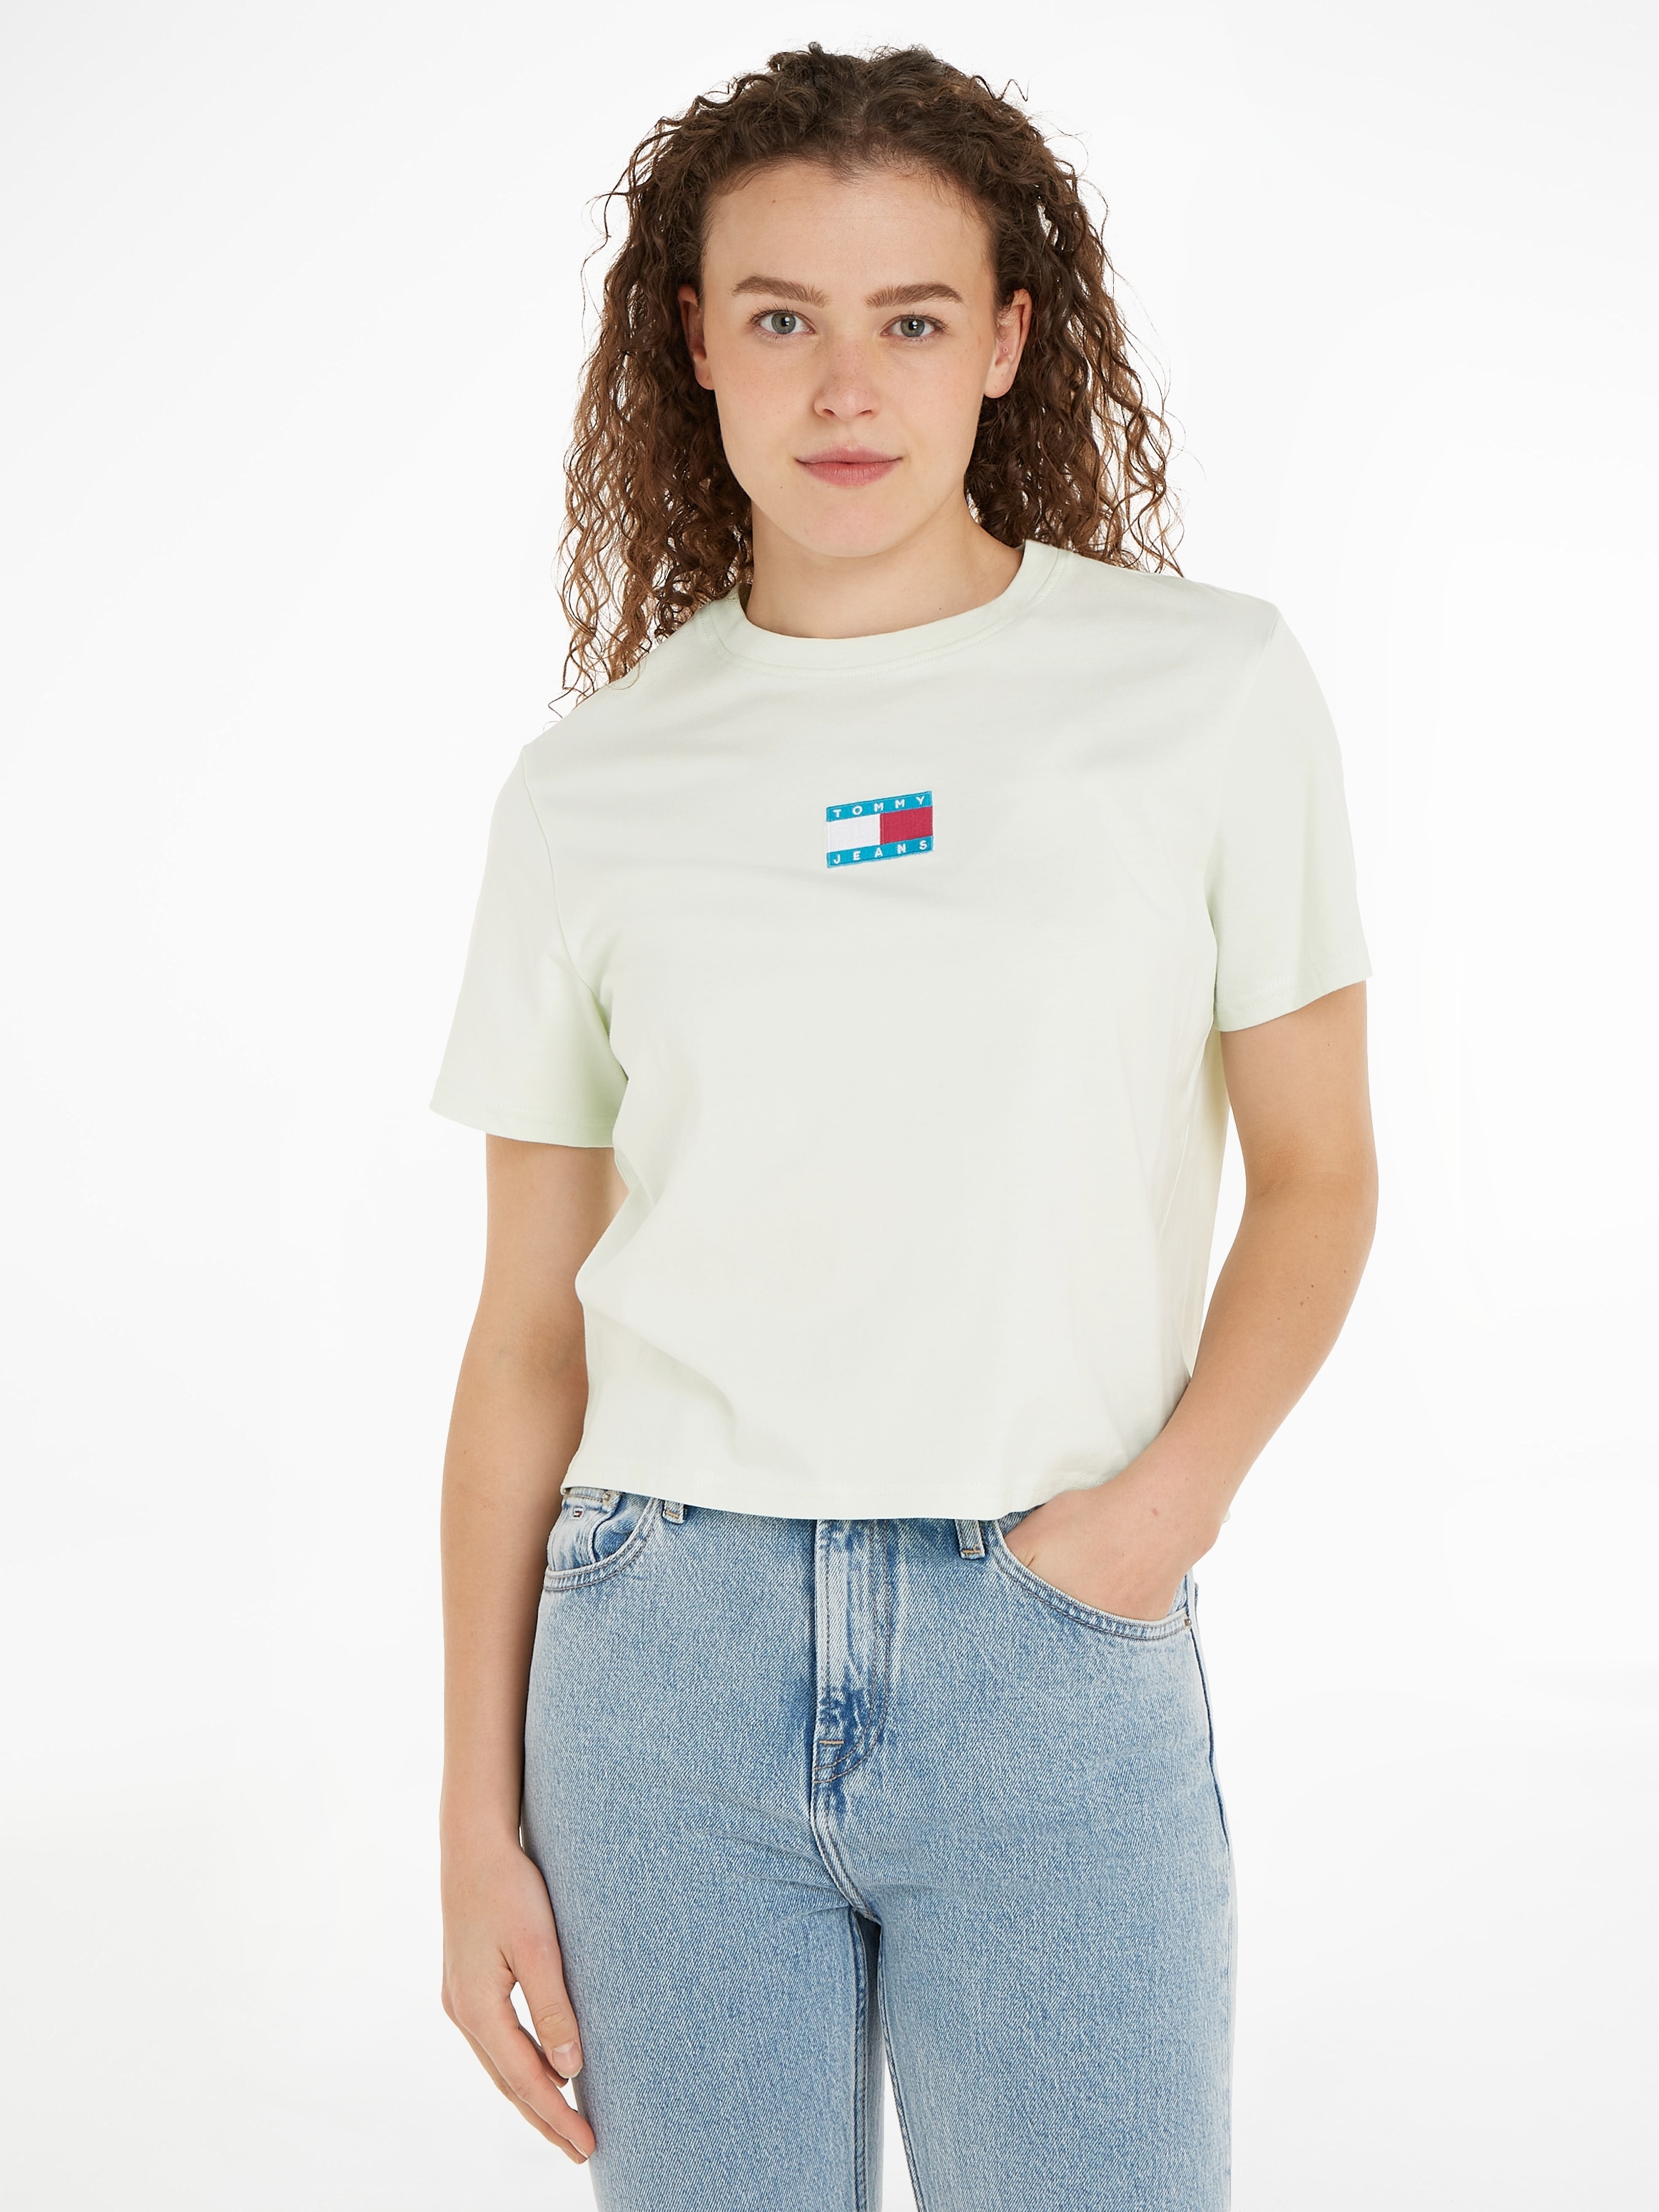 Tommy Jeans T-Shirt mit »TJW BADGE TEE«, Logostickerei I\'m CLS kaufen Jeans walking POP Tommy 